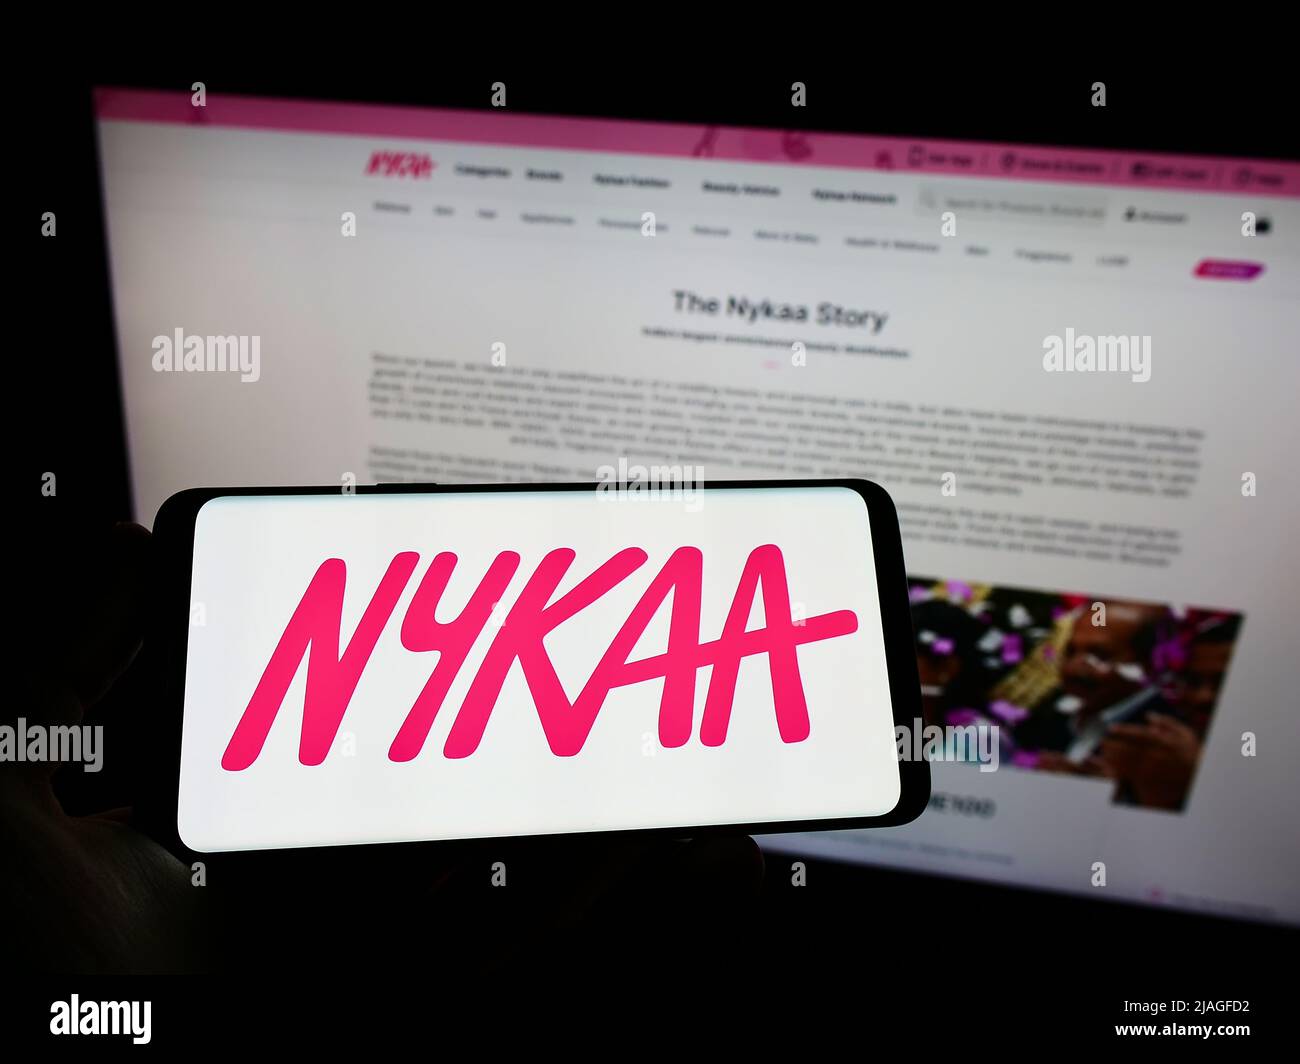 Person holding mobile phone with logo of e-commerce company Nykaa E-Retail Pvt. Ltd. on screen in front of web page. Focus on phone display. Stock Photo